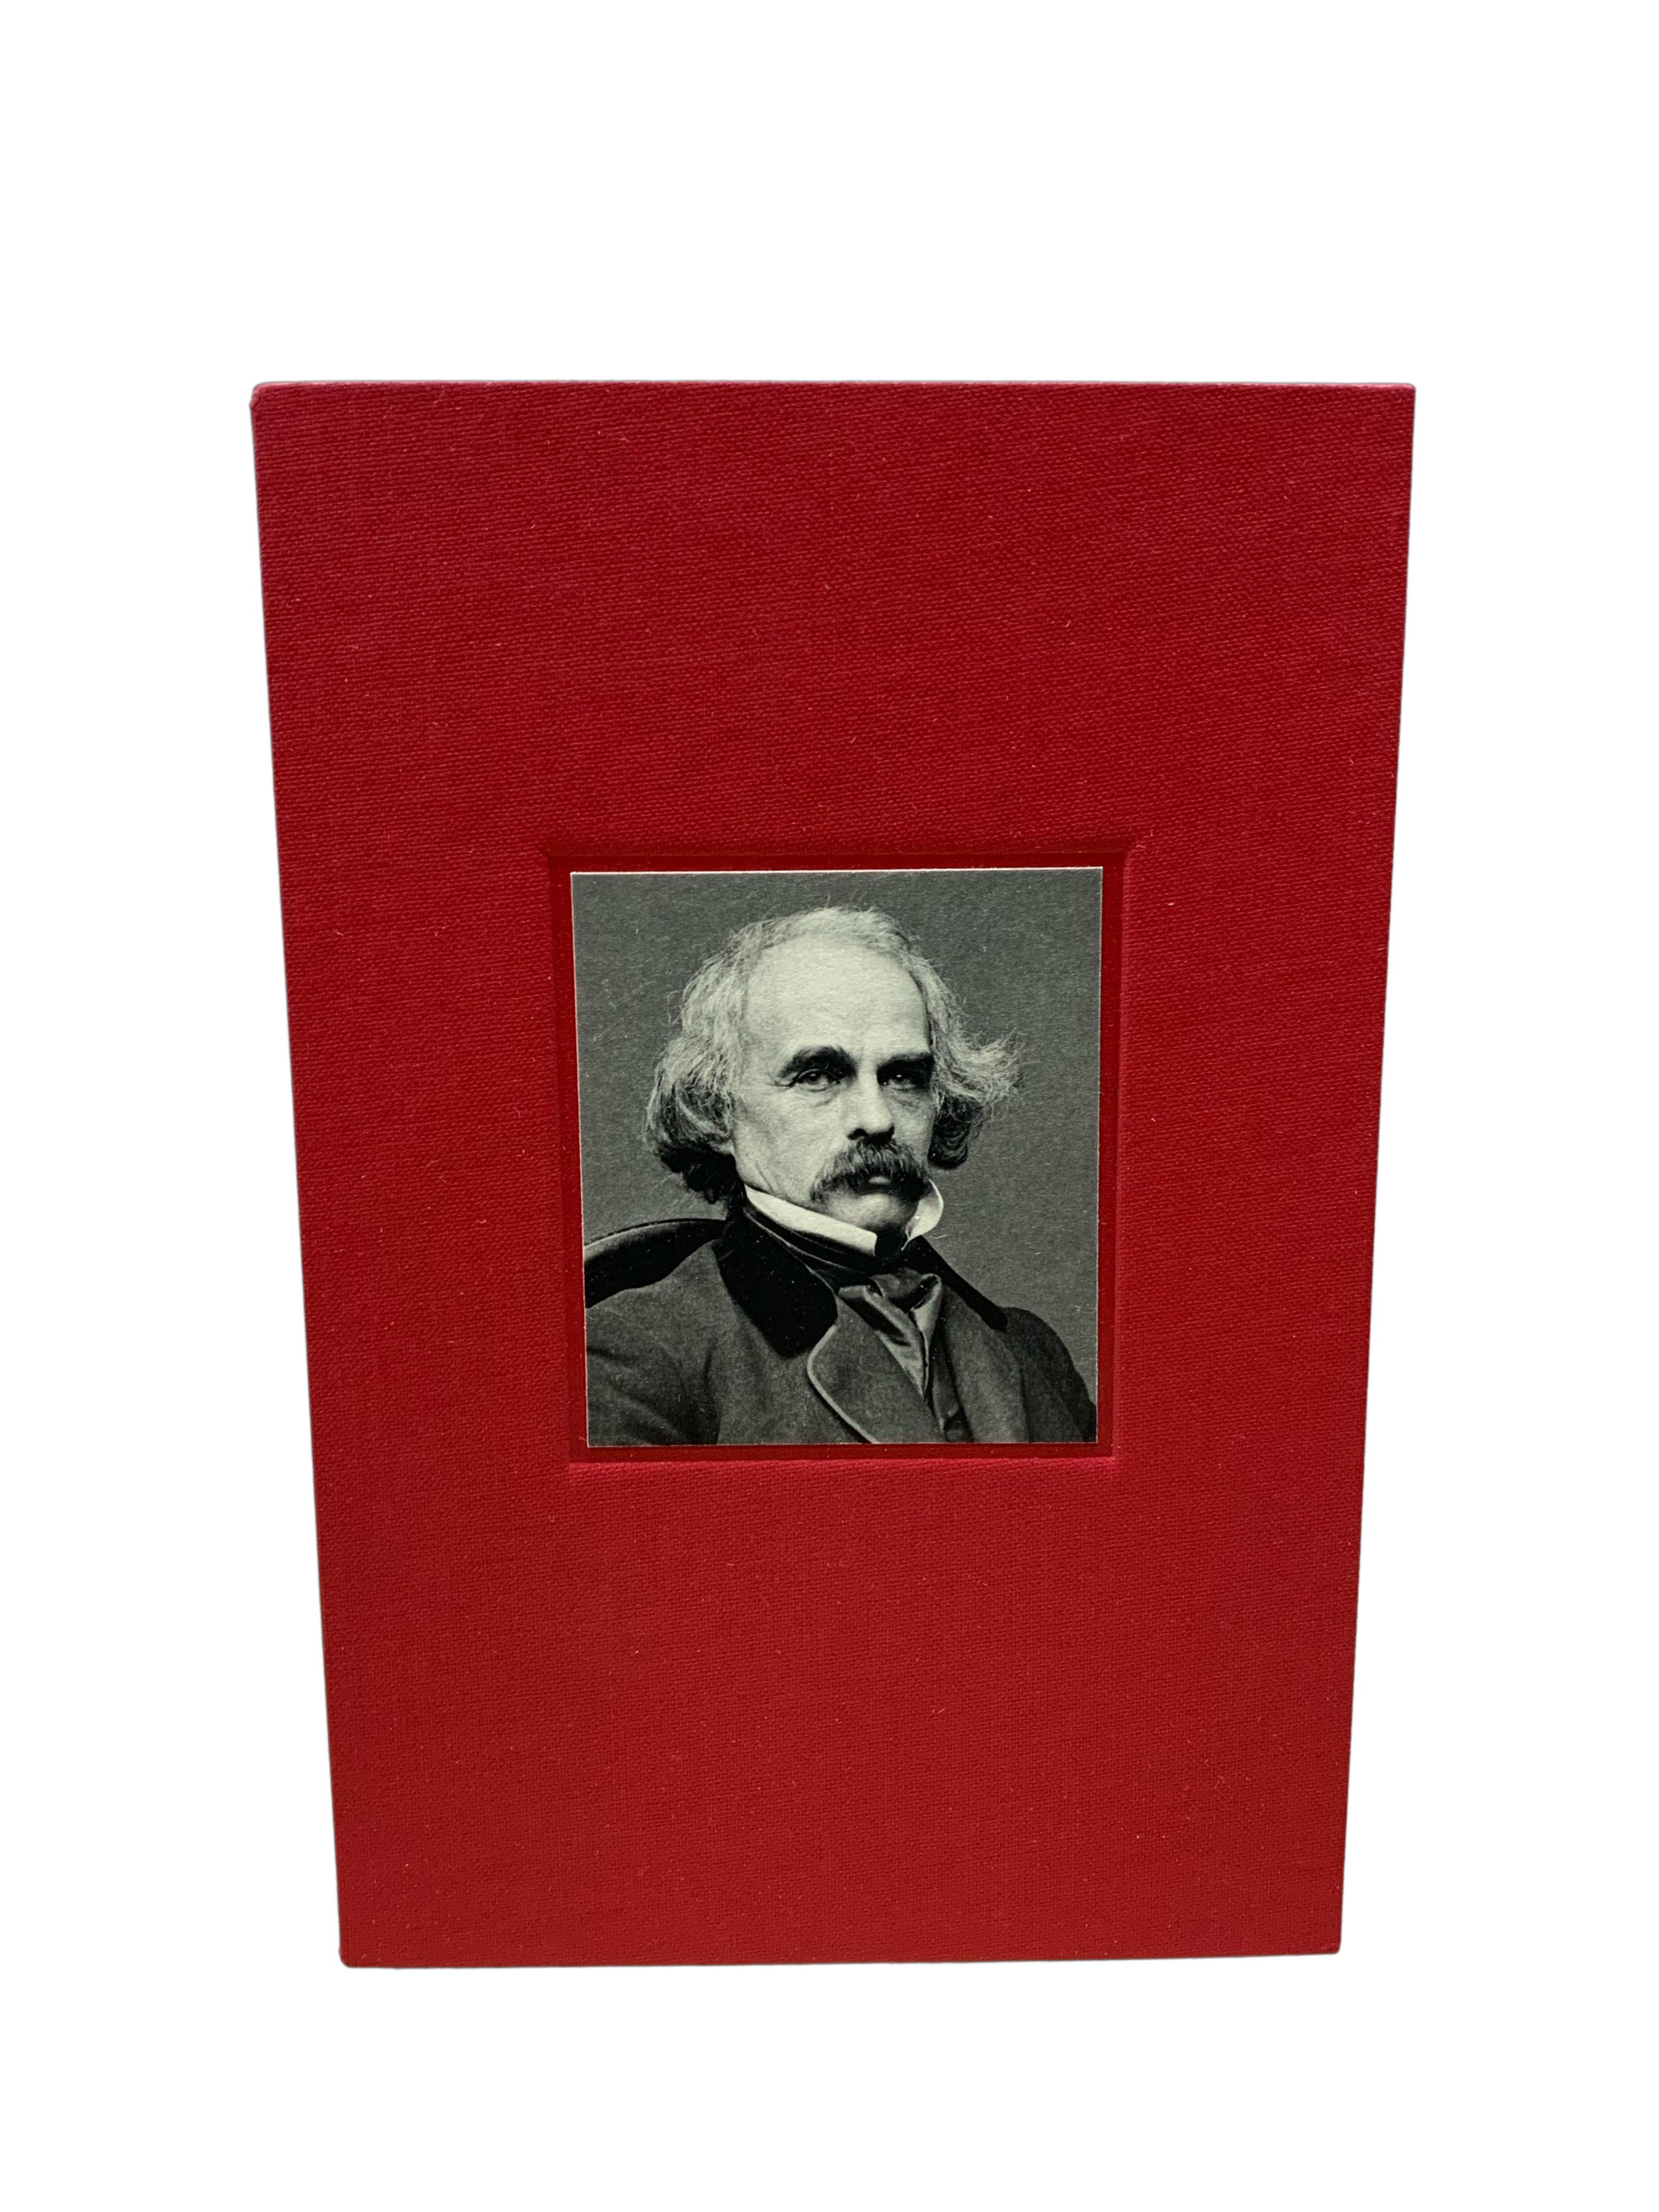 The Scarlet Letter by Nathaniel Hawthorne, Second Ed., Tipped-in Signature, 1850 In Good Condition For Sale In Colorado Springs, CO